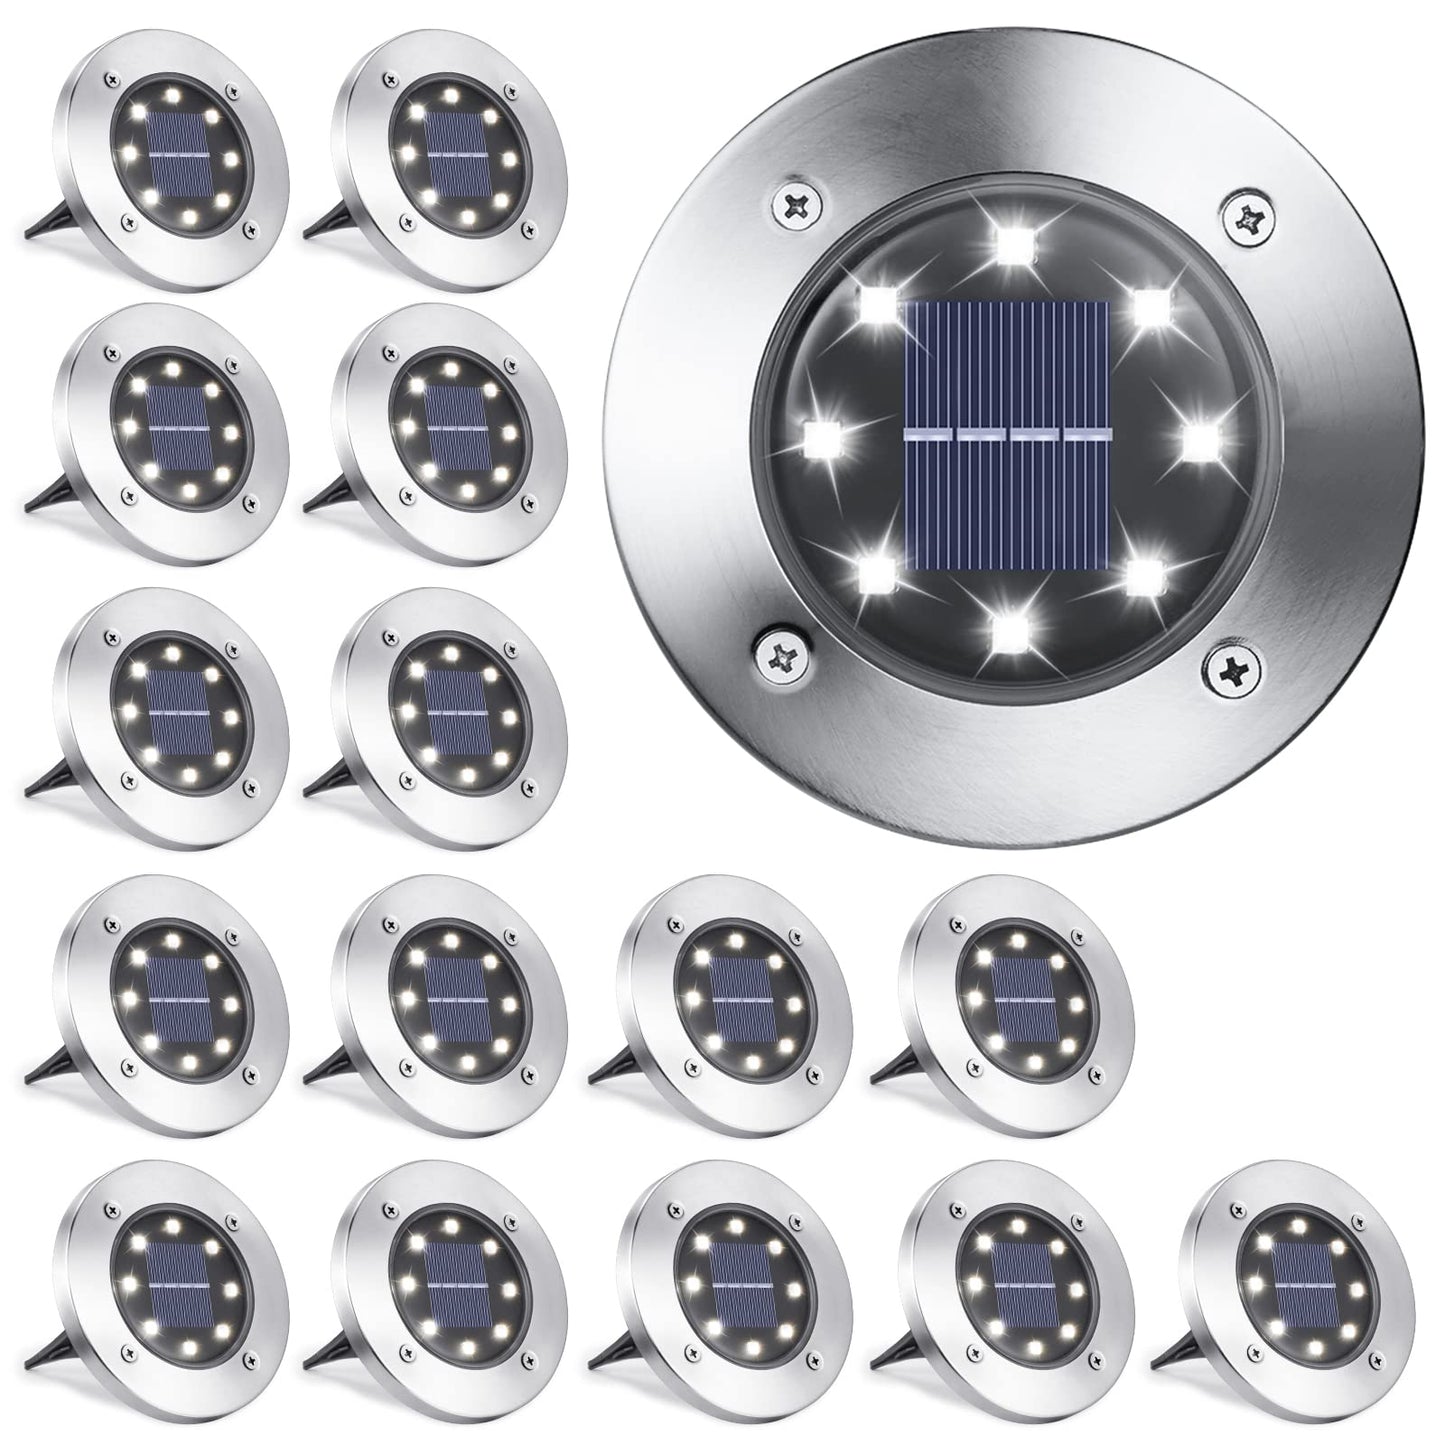 LYHOPE Solar Ground Lights Outdoor, 16 Pack 8 LED Solar Disk Lights Waterproof Garden In-ground Pathway Lights Landscape Lighting for Lawn,Yard,Deck,Patio,Walkway (White)